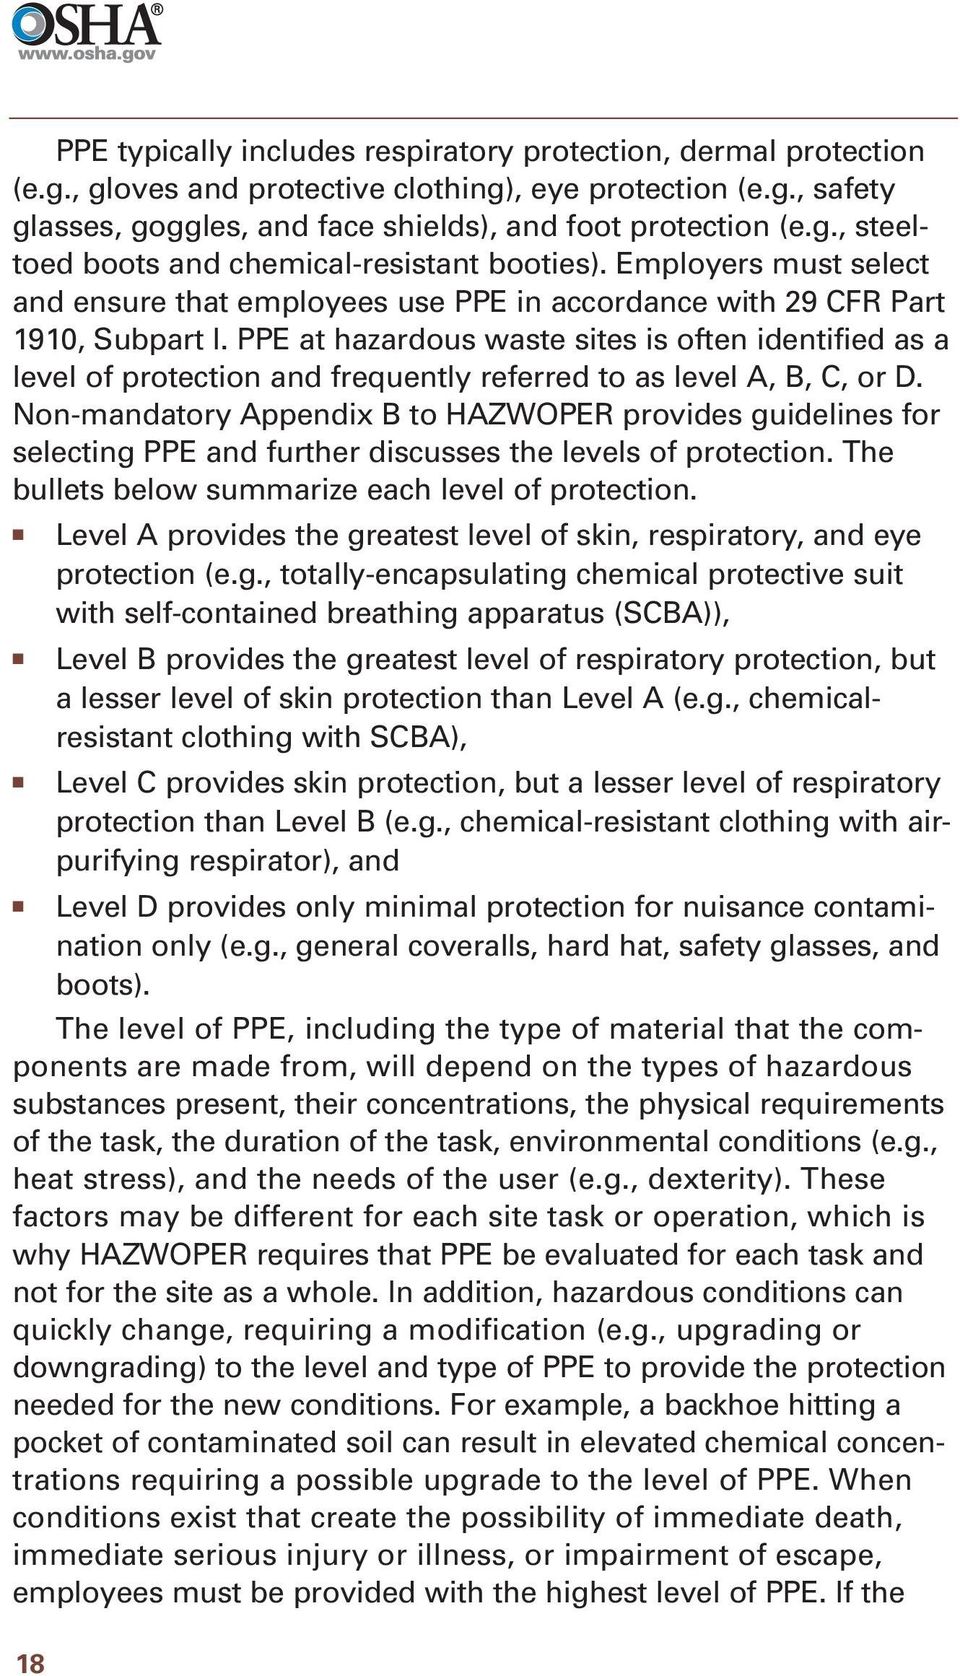 PPE at hazardous waste sites is often identified as a level of protection and frequently referred to as level A, B, C, or D.